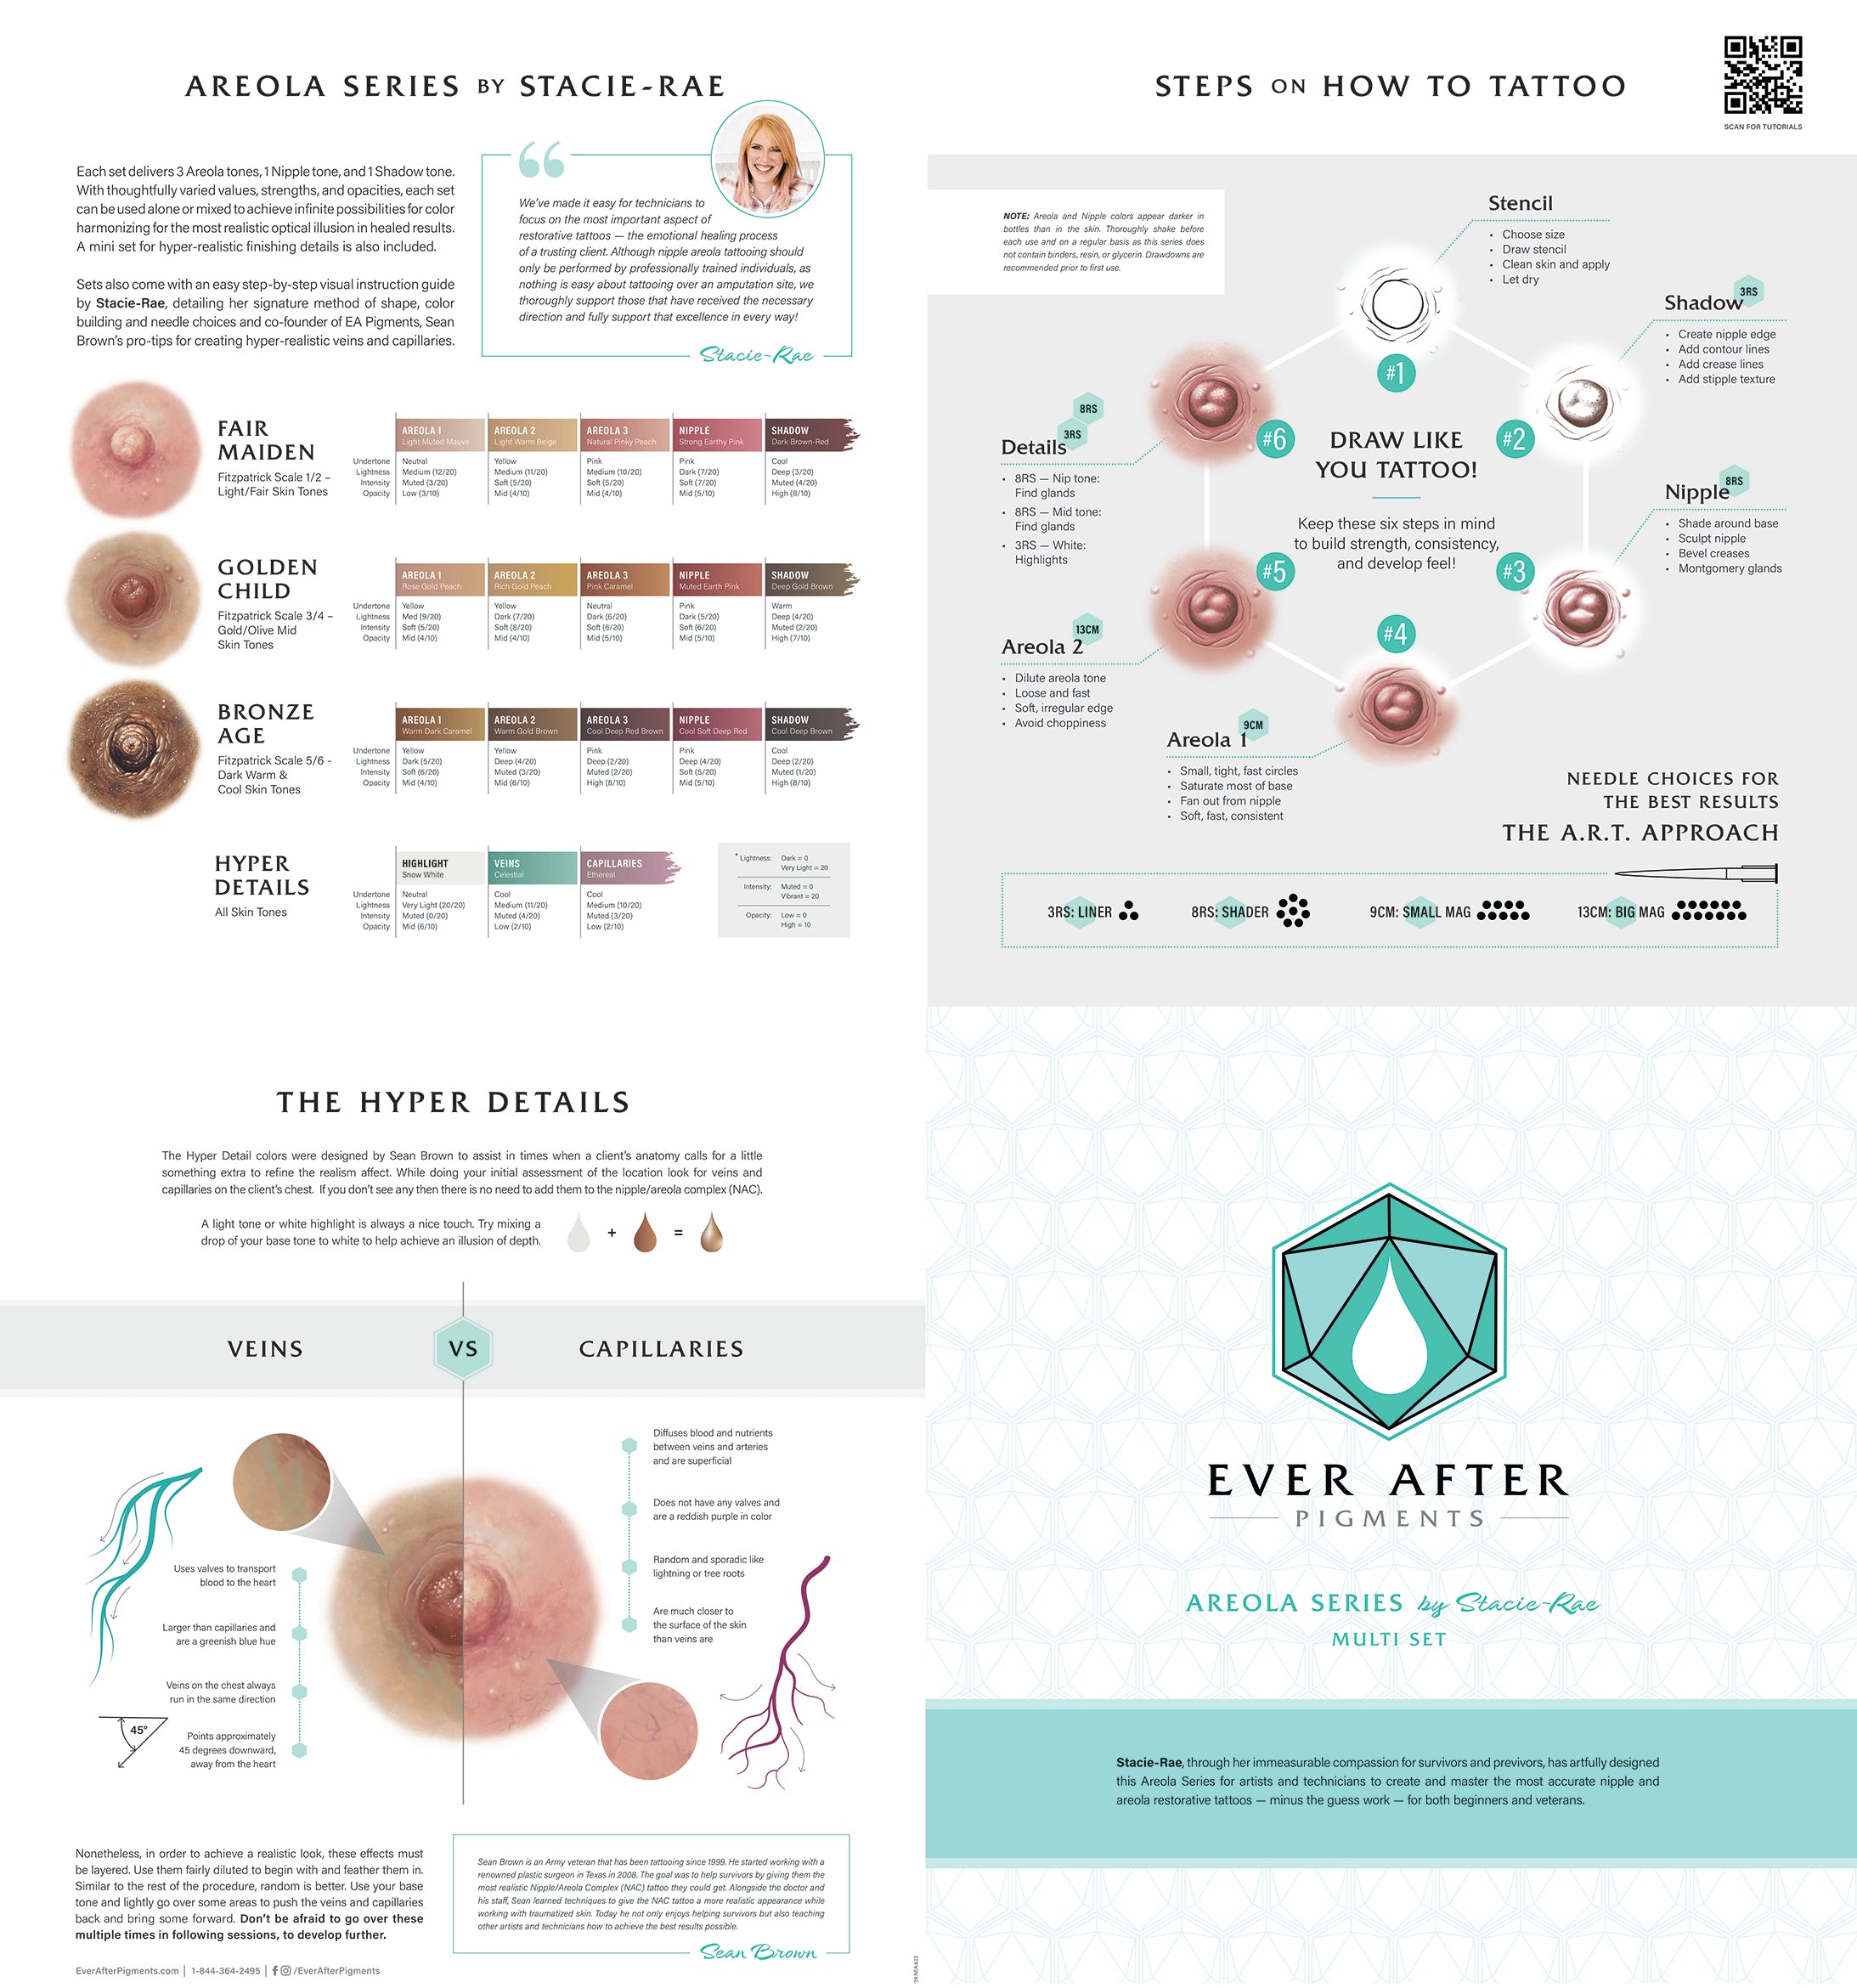 Ever After Pigments Areola Series by Stacie-Rae Multi-Set Guide